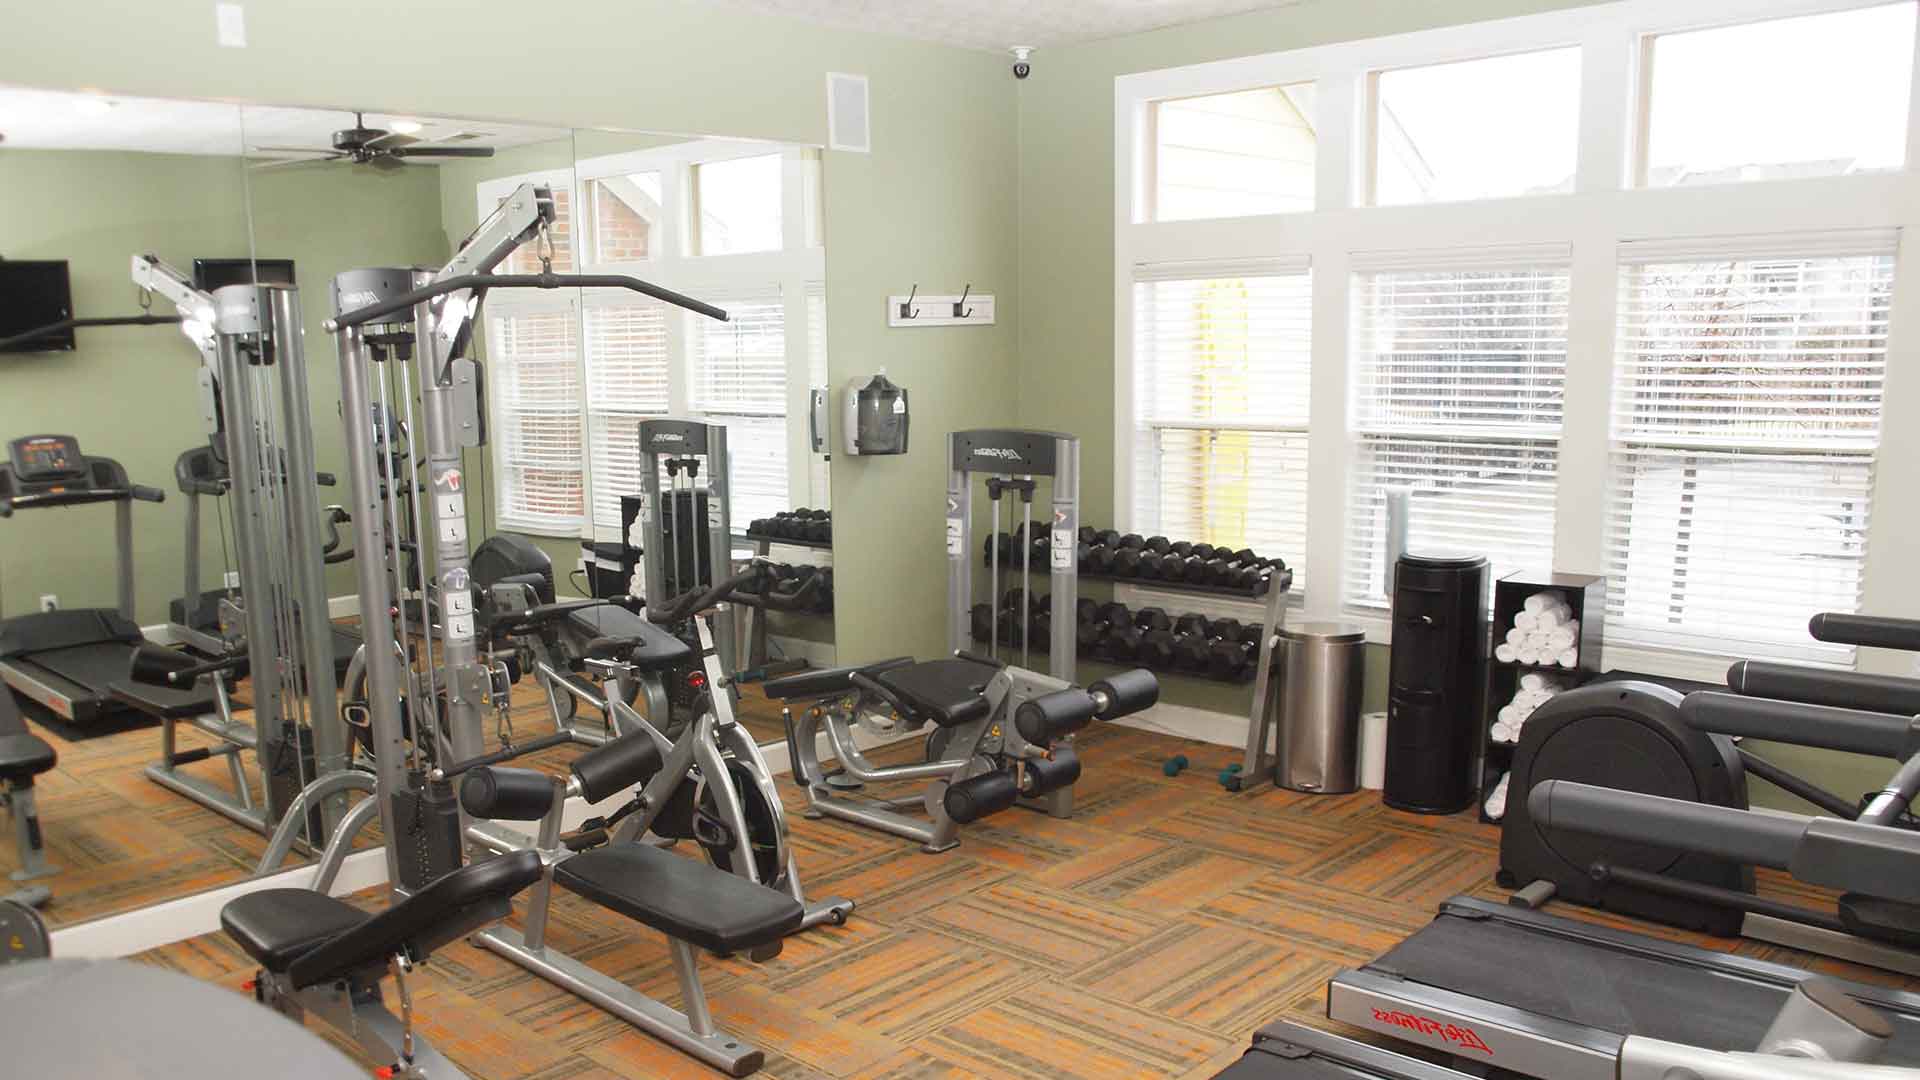 Fitness center with workout machines and free-weights at Waterford Place.